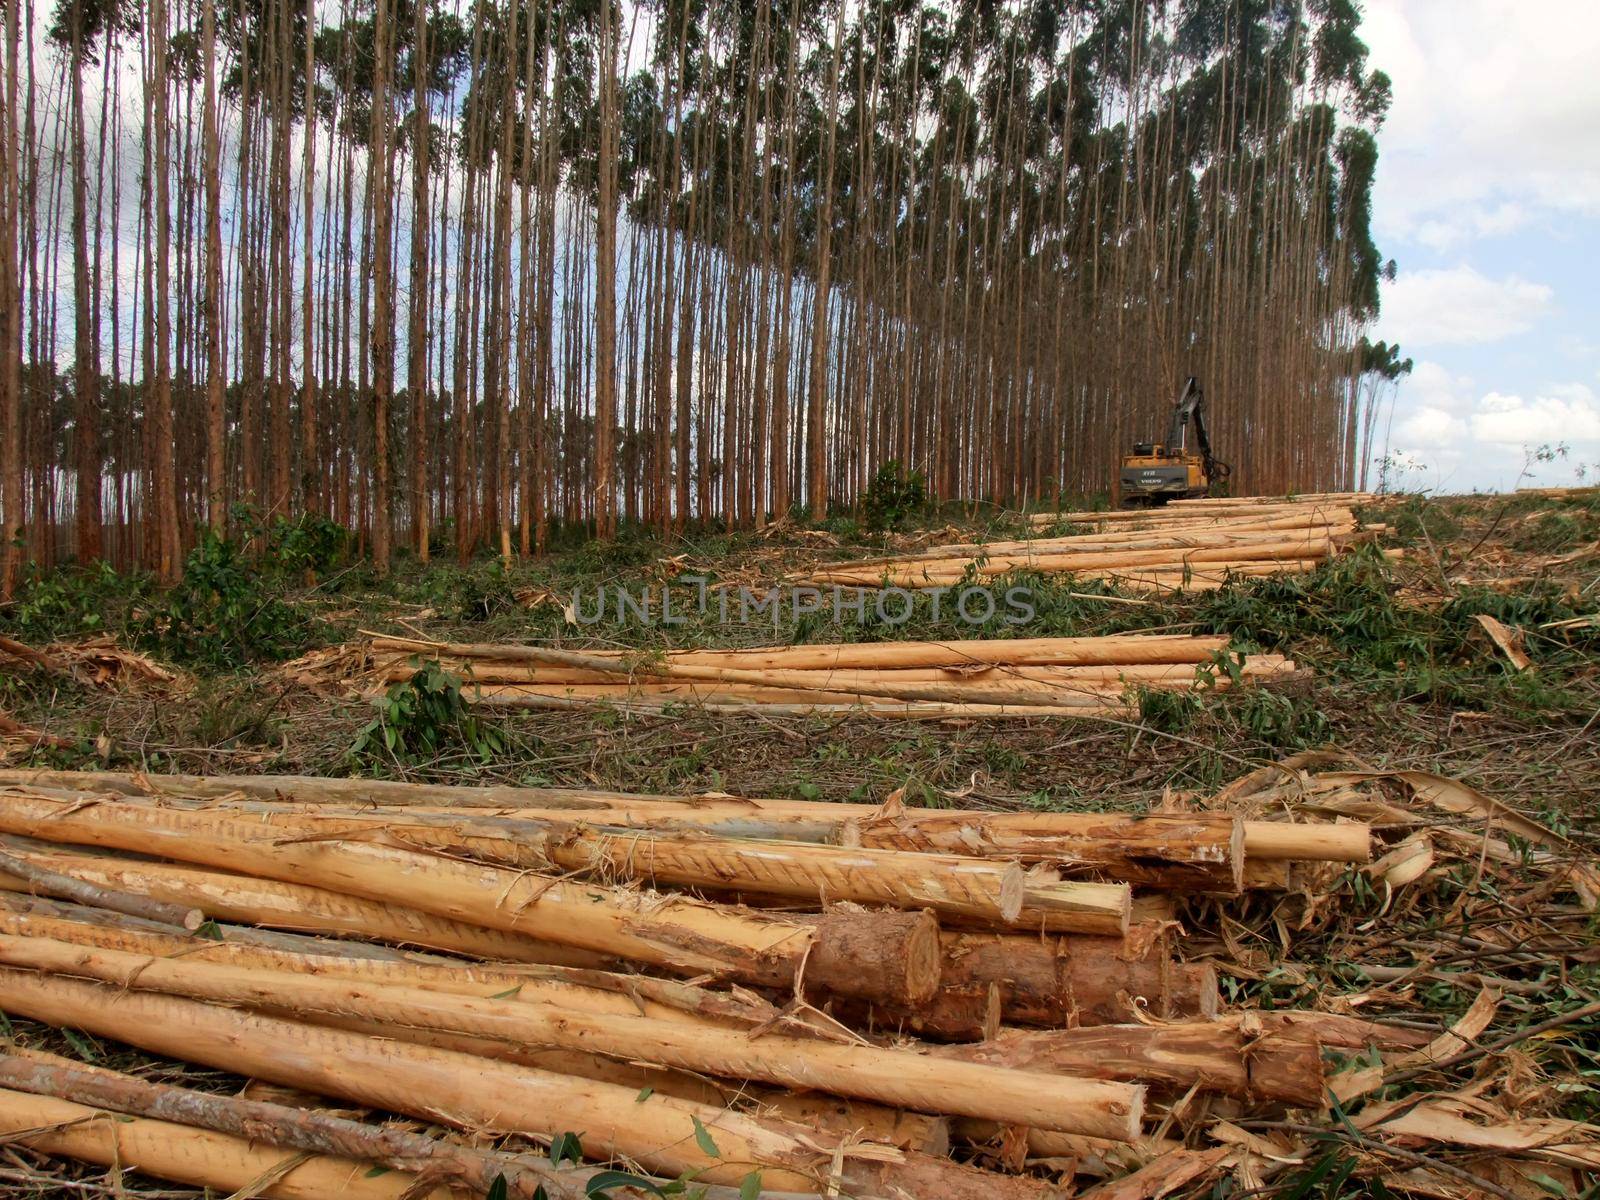 eunapolis, bahia / brazil - november 26, 2010: Harvester is seen cutting eucalyptus trees for pulp production in a factory in the city of Eunapolis.